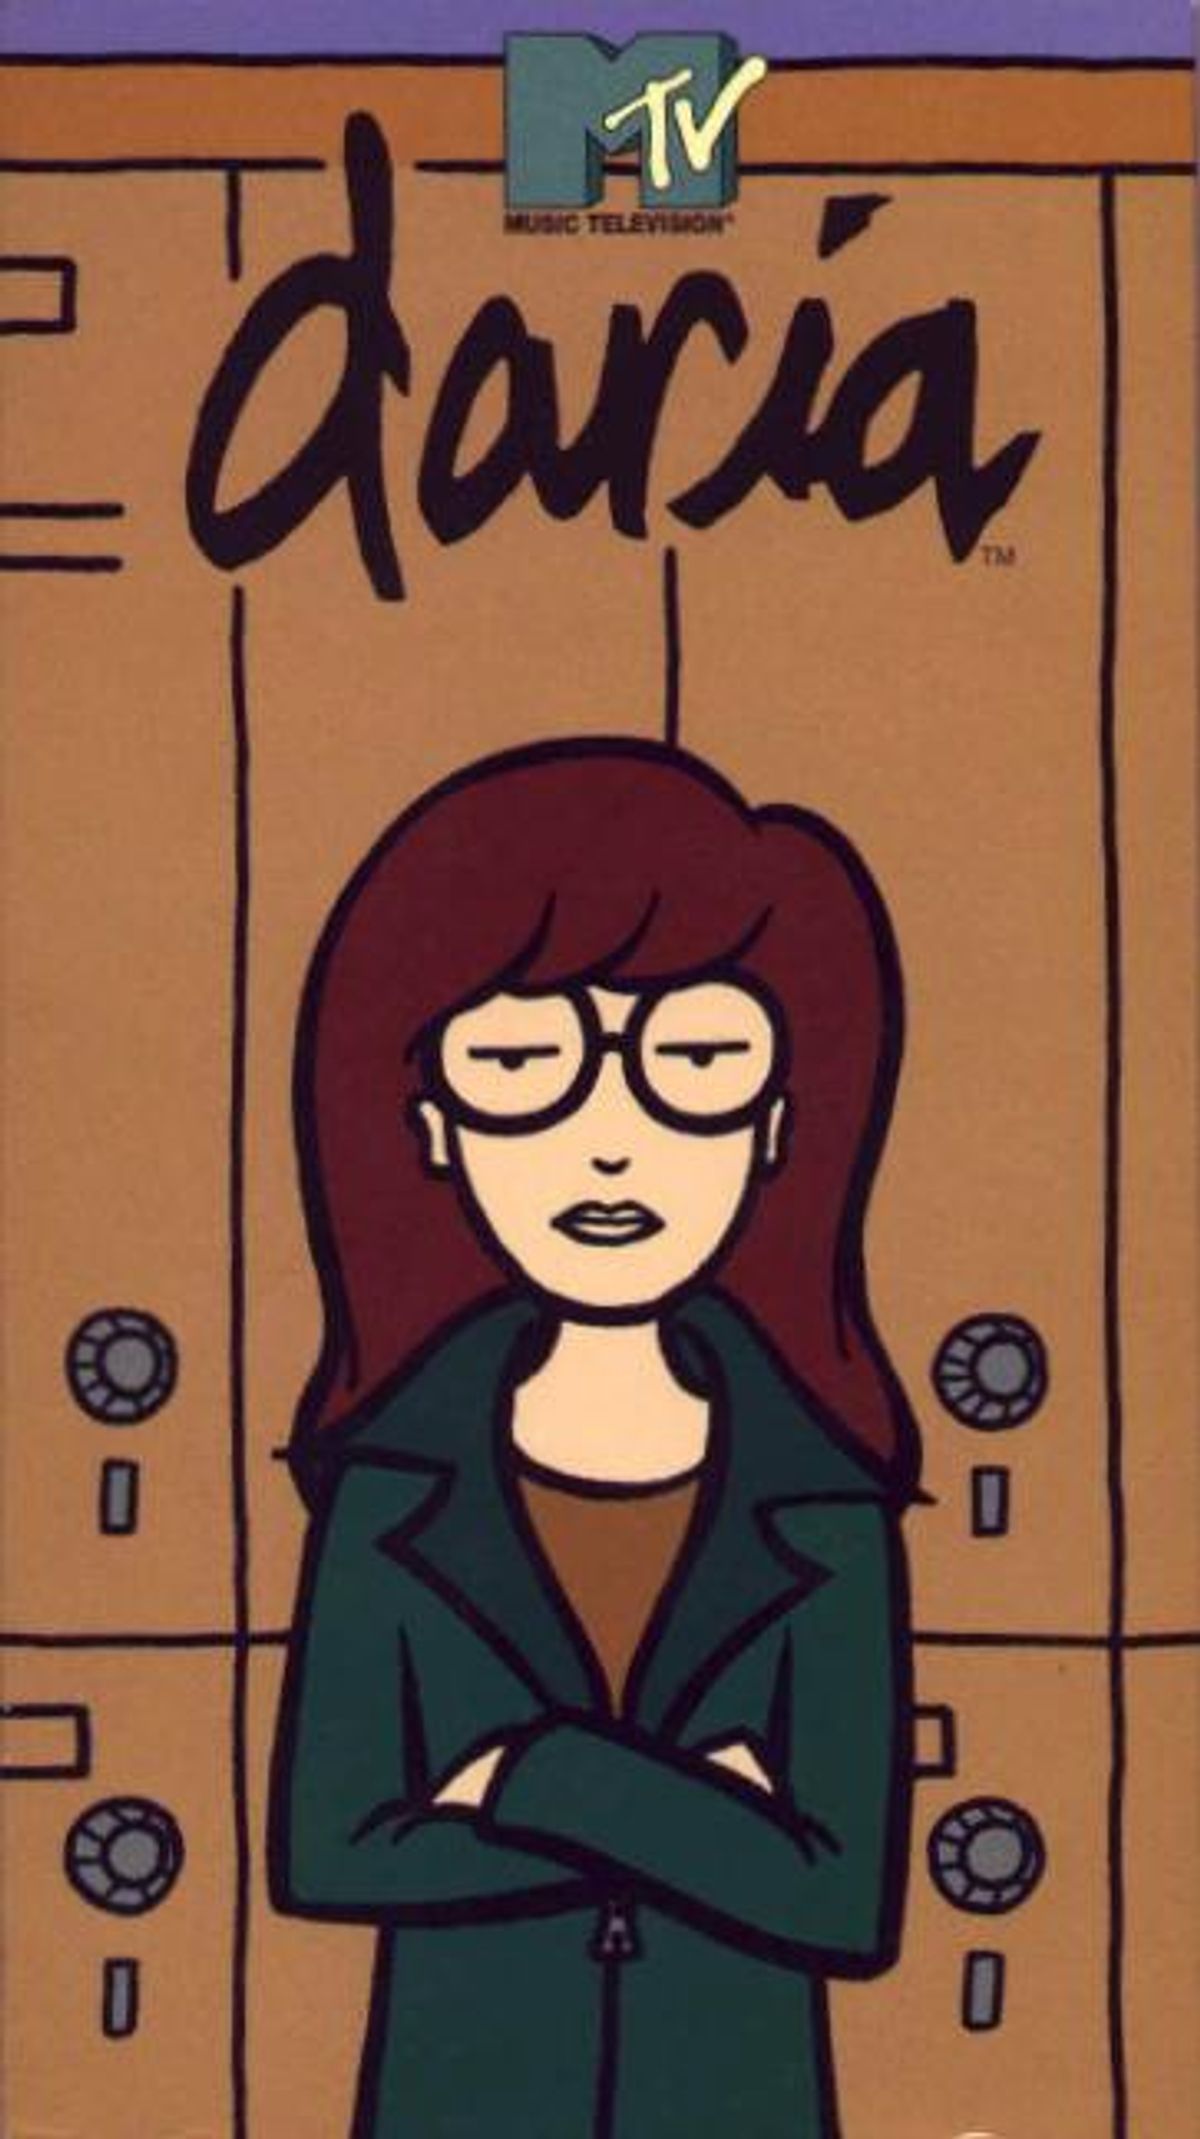 MTV's "Daria: The Complete Series" comes out on DVD this week